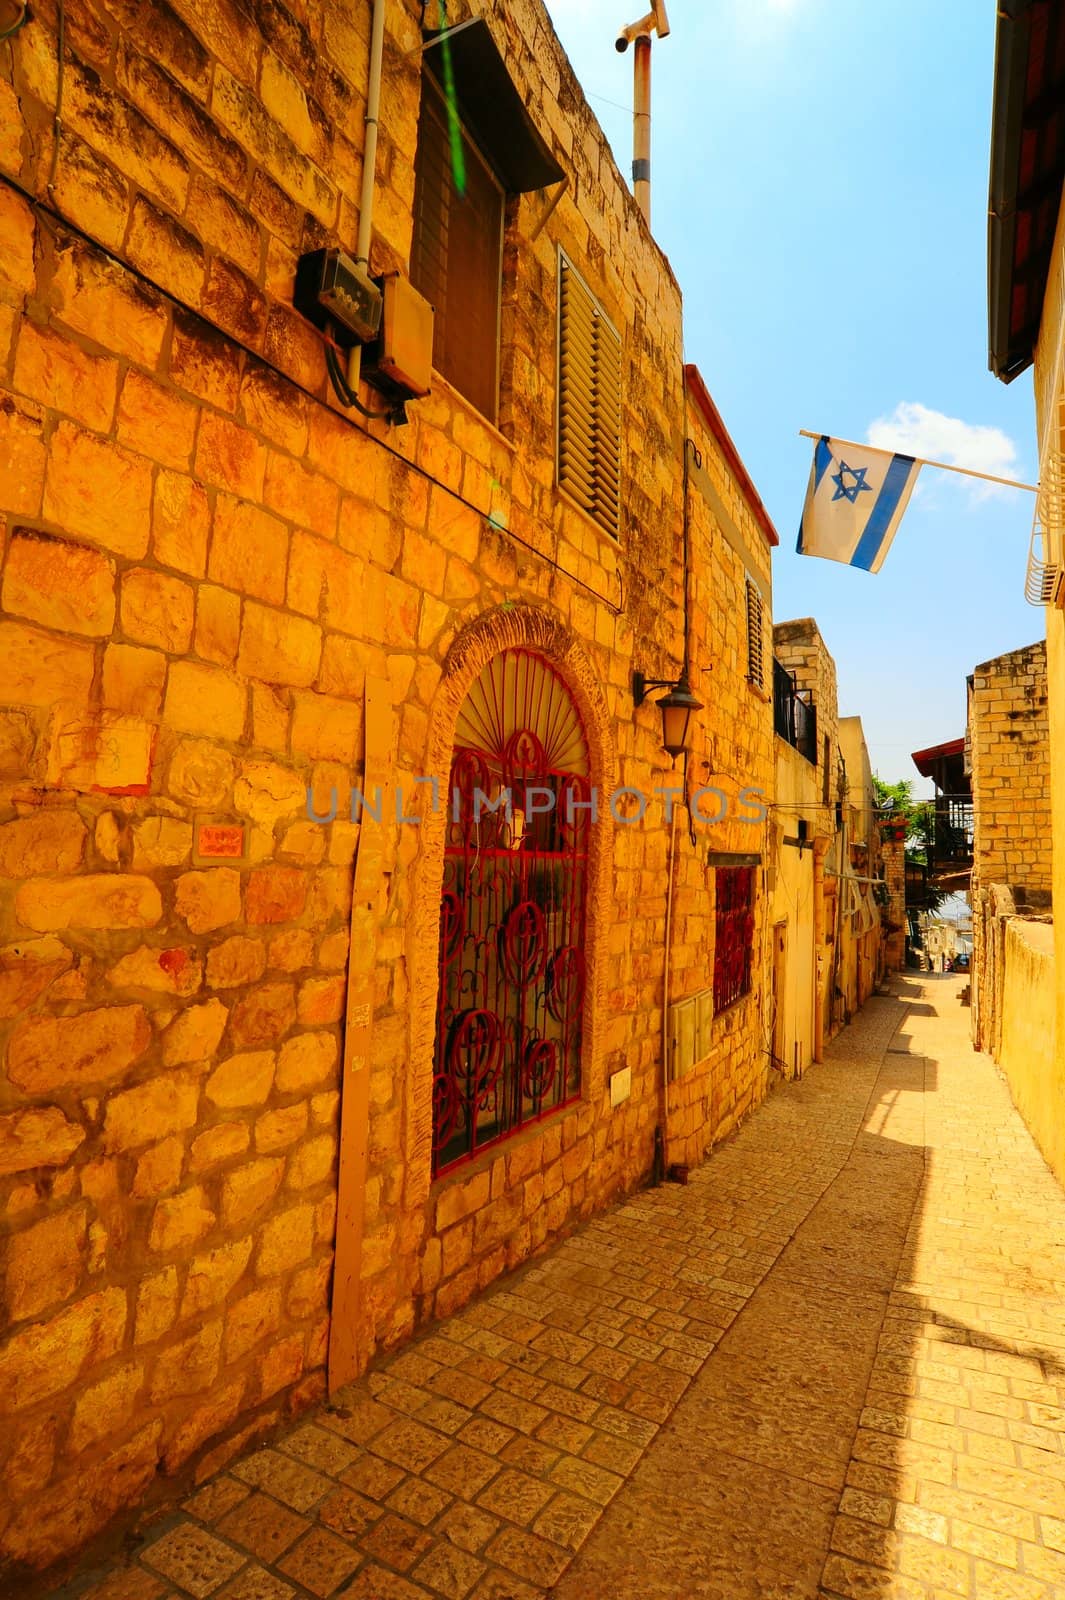 Narrow Alley with Old Buildings and Israel Flag in Kabbalah City of Safed.